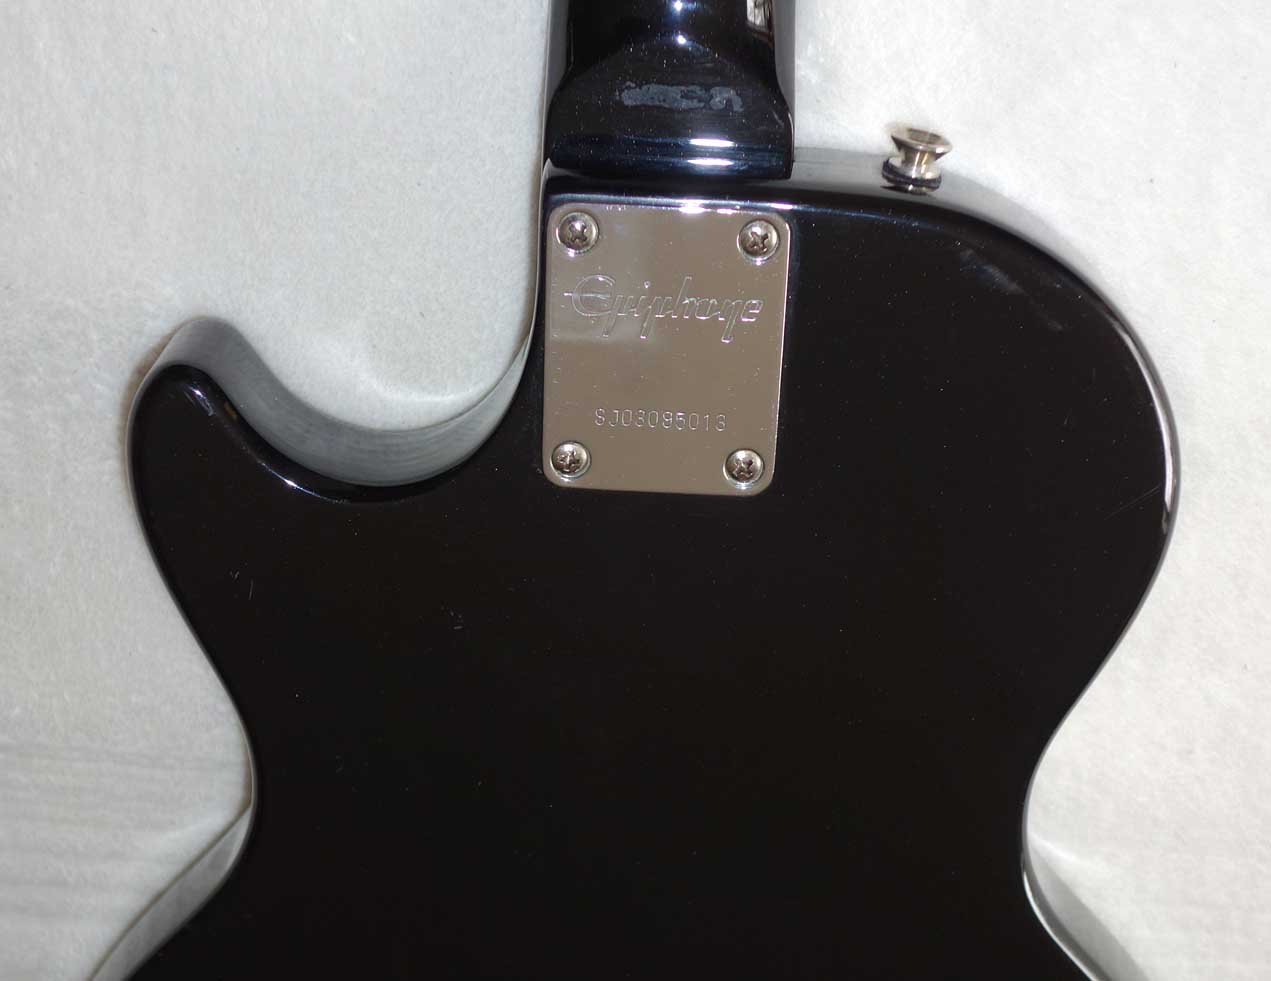 2003 Epiphone Les Paul Junior w/Epi P90 Mod, Upgraded Tuners, USA Posts/Threads, Made by SaeJun (China) 